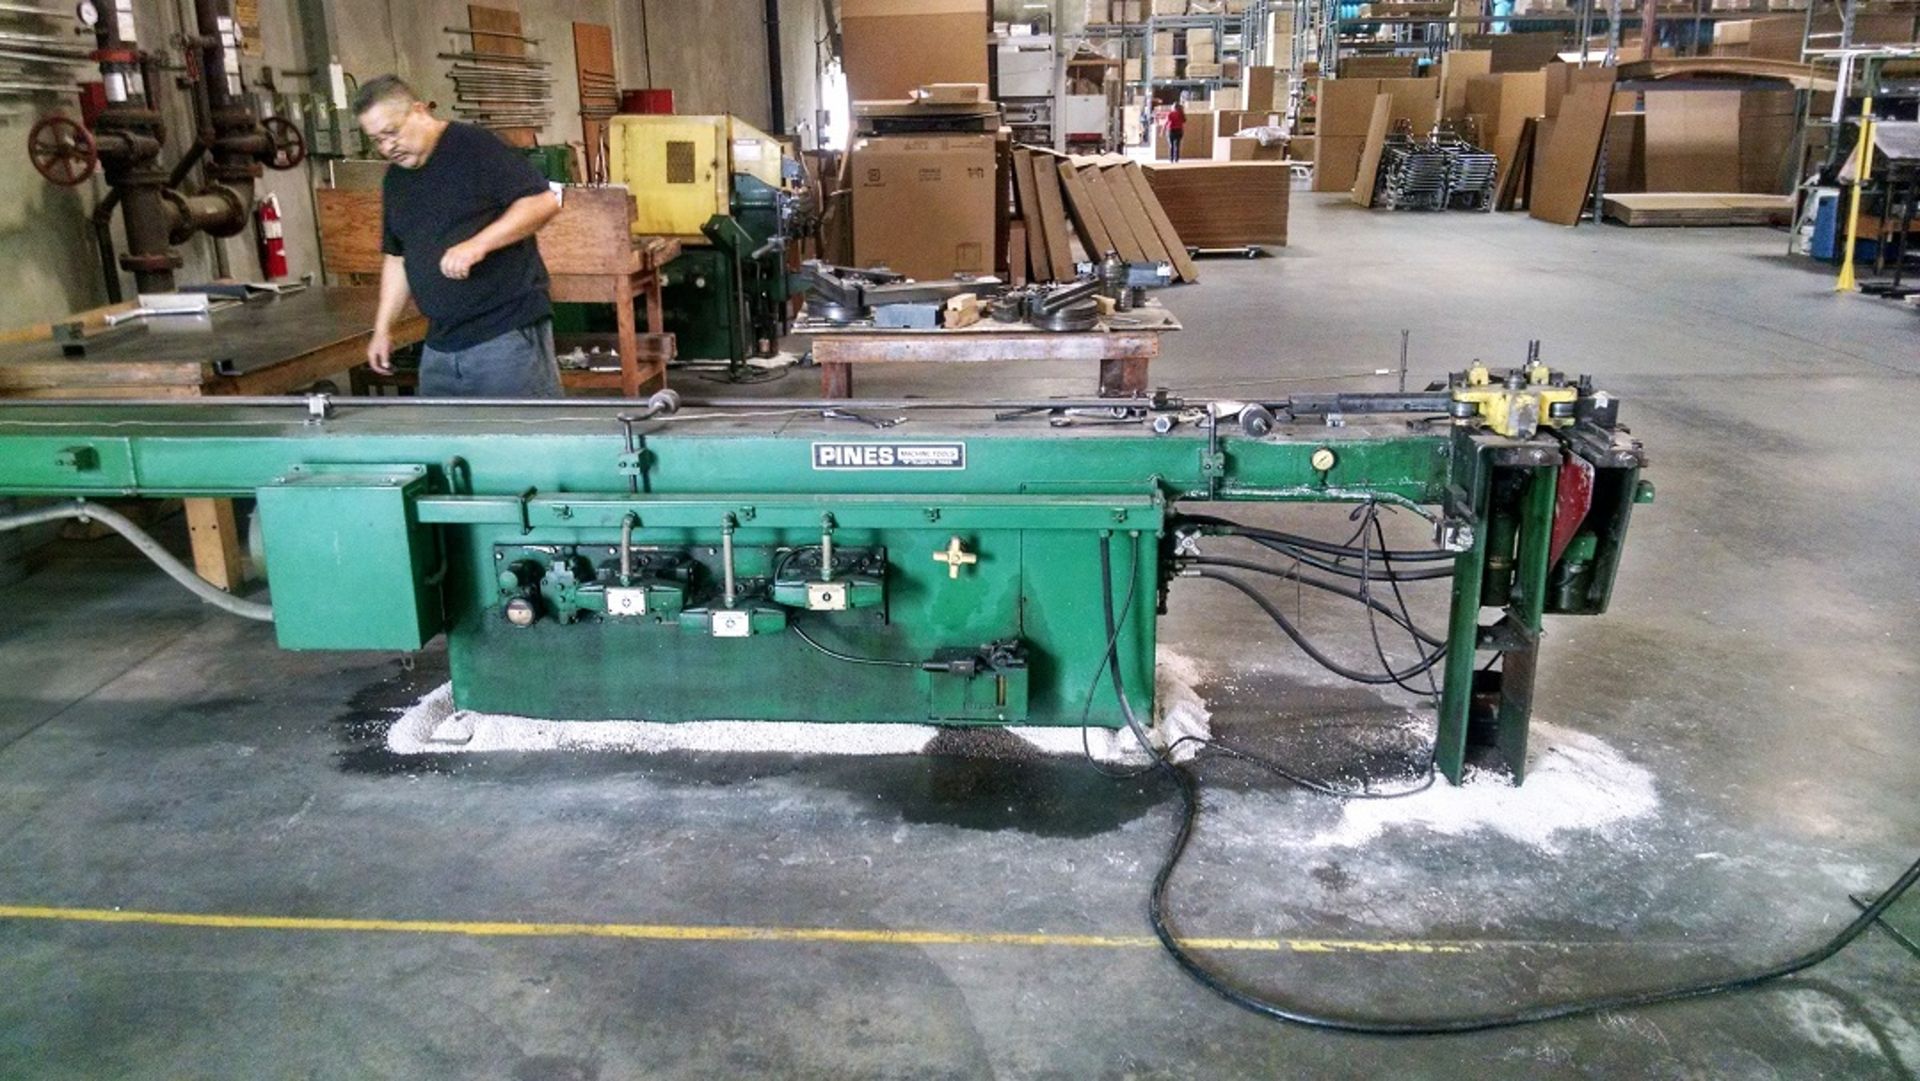 PINES Hydraulic Rotary Bending Machine, Counter Clockwise Bend Model 1 - Image 2 of 4